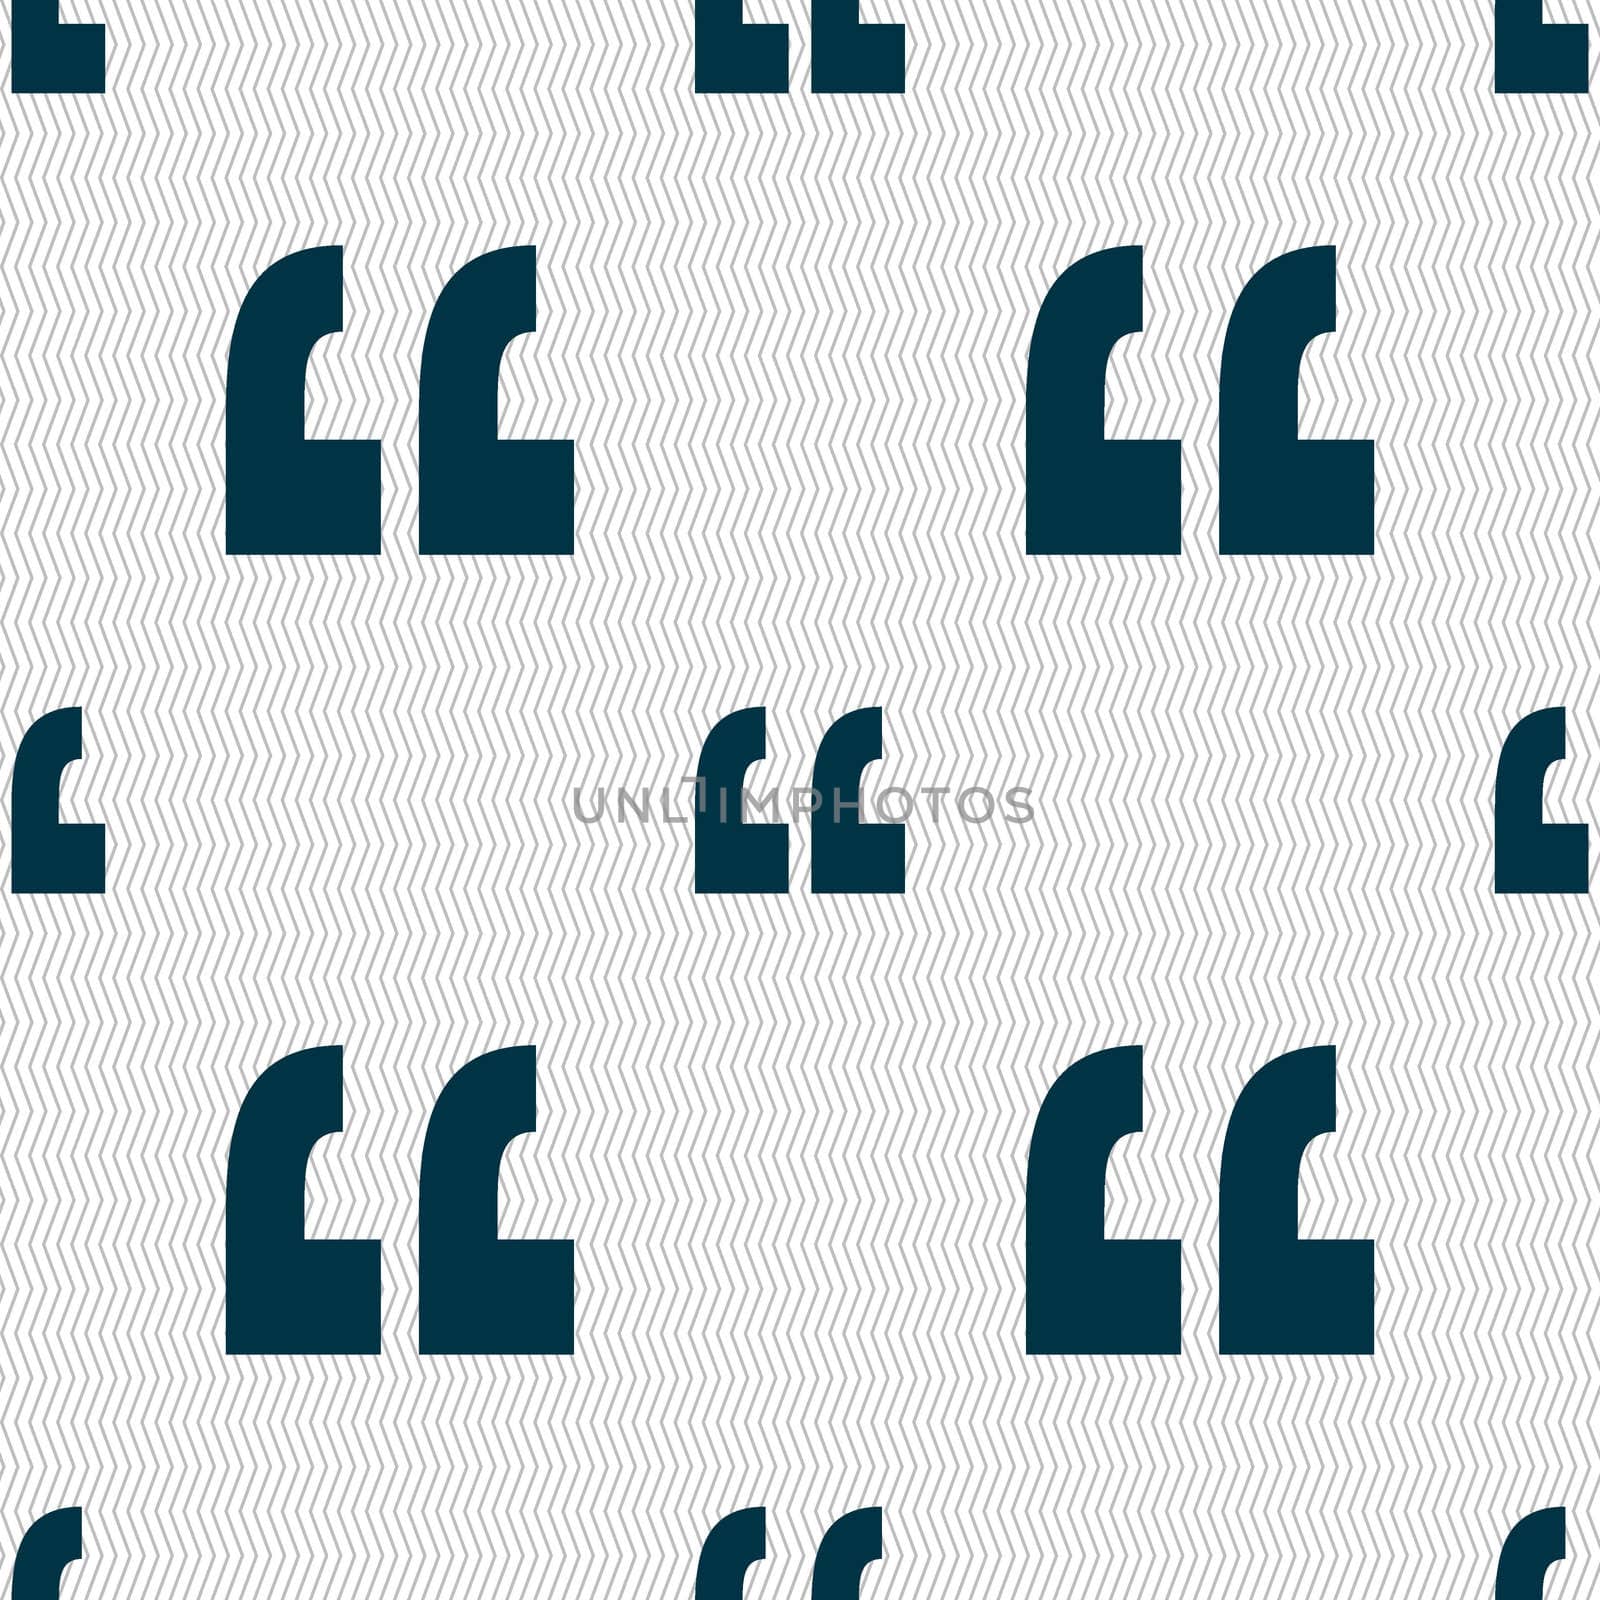 Quote sign icon. Quotation mark symbol. Double quotes at the end of words. Seamless abstract background with geometric shapes. illustration